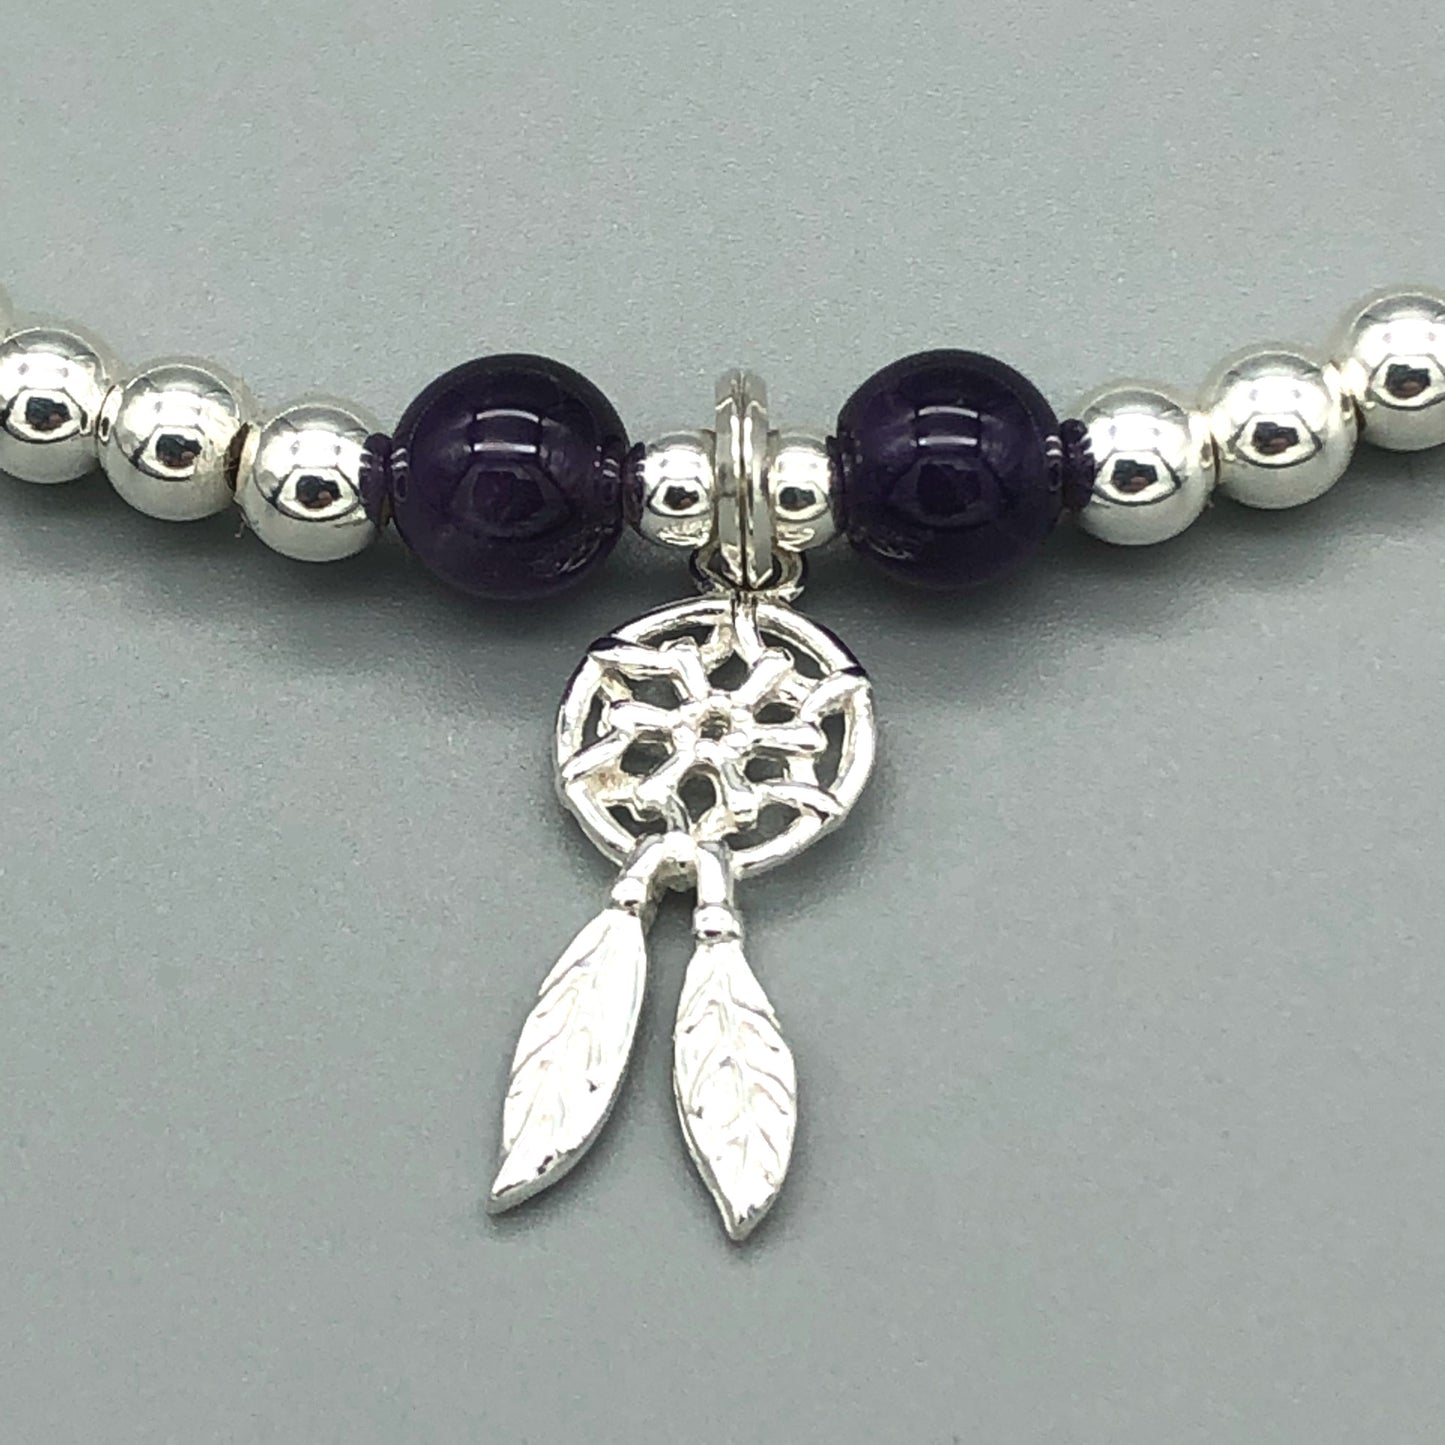 Closeup of Dream Catcher Charm & Amethyst Crystal Beads Sterling Silver Stacking bracelet by My Silver Wish